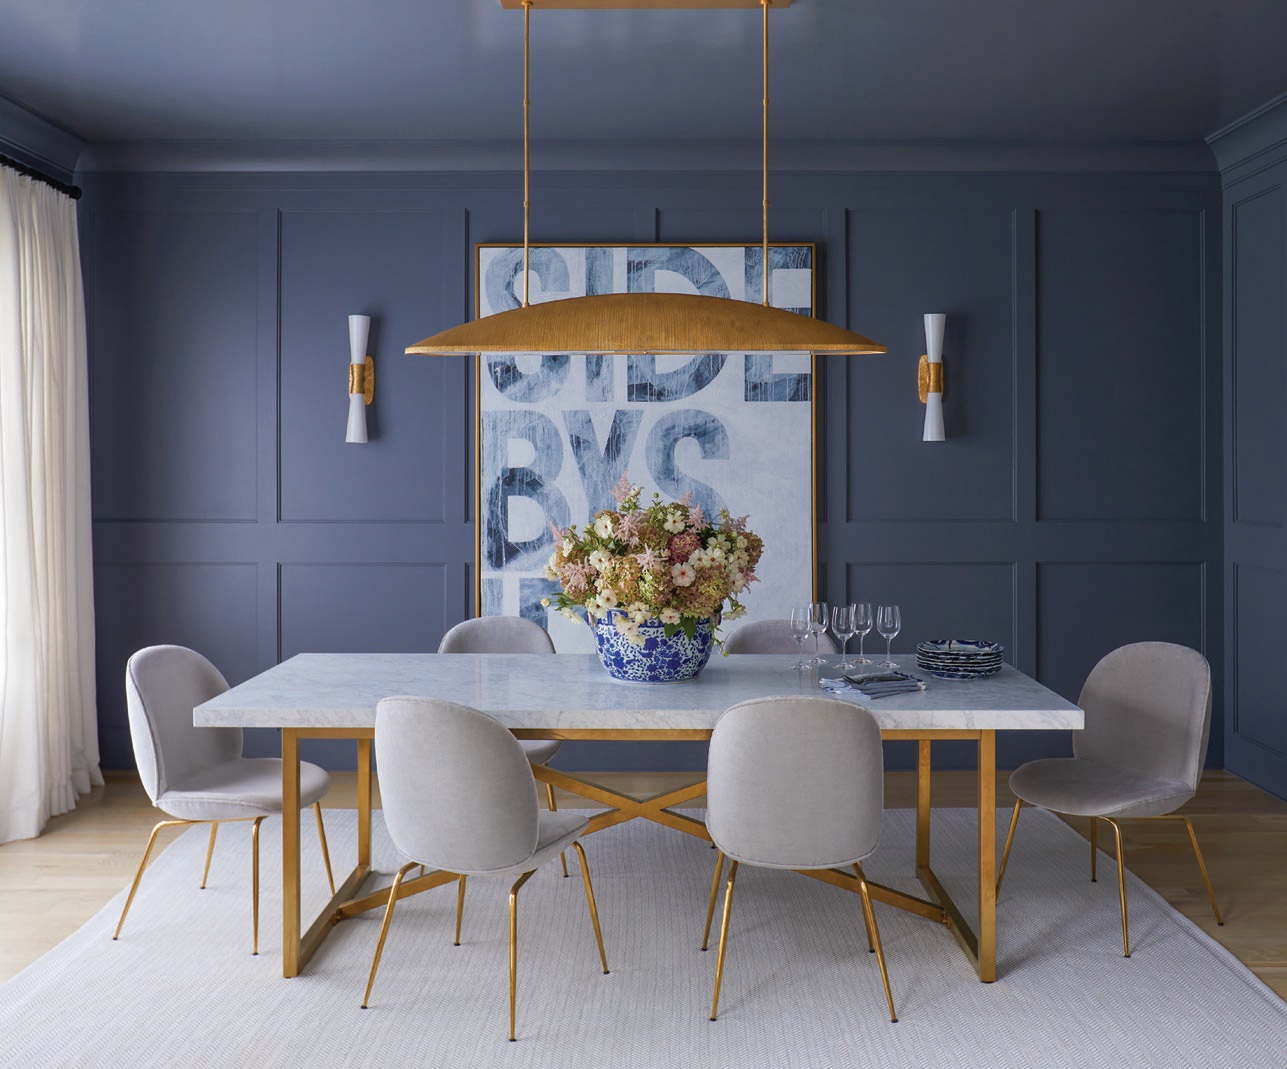 The dining room features a moody Benjamin Moore Ashland Slate 1608 hue. PHOTOGRAPHED BY MANU RODRIGUEZ